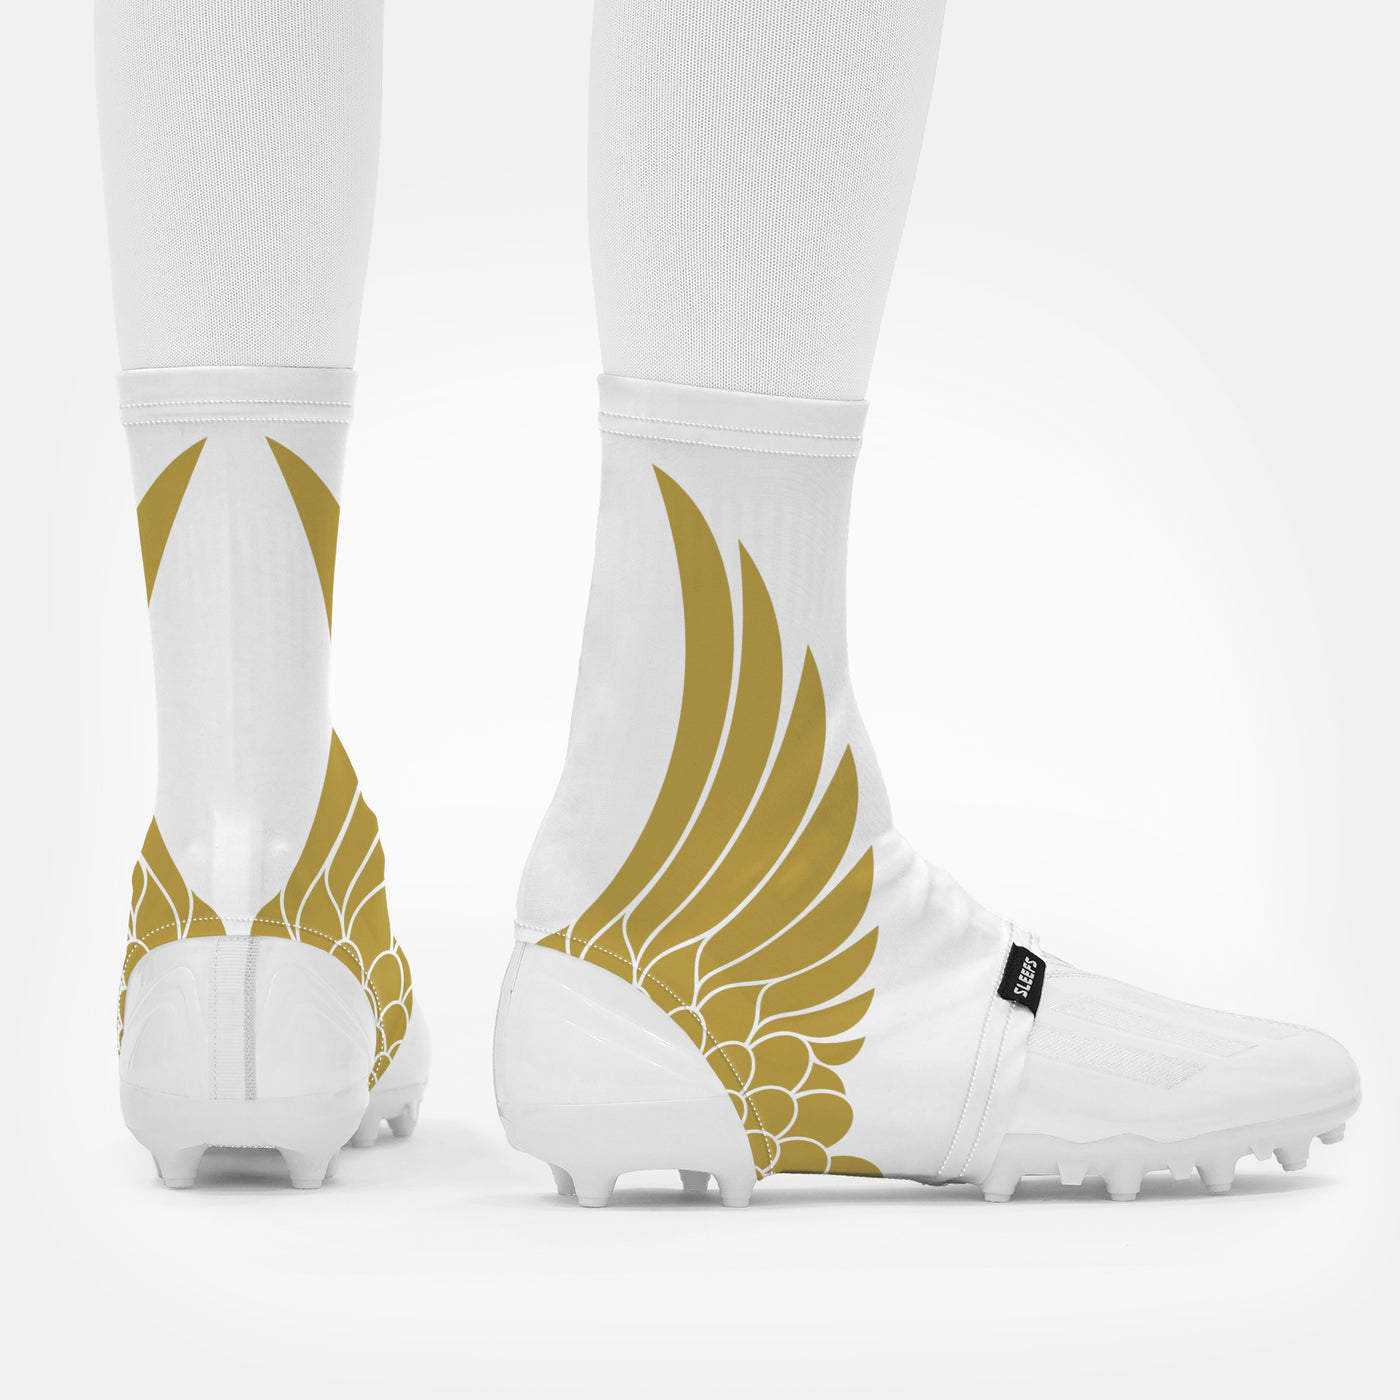 Icarus White Gold Spats / Cleat Covers